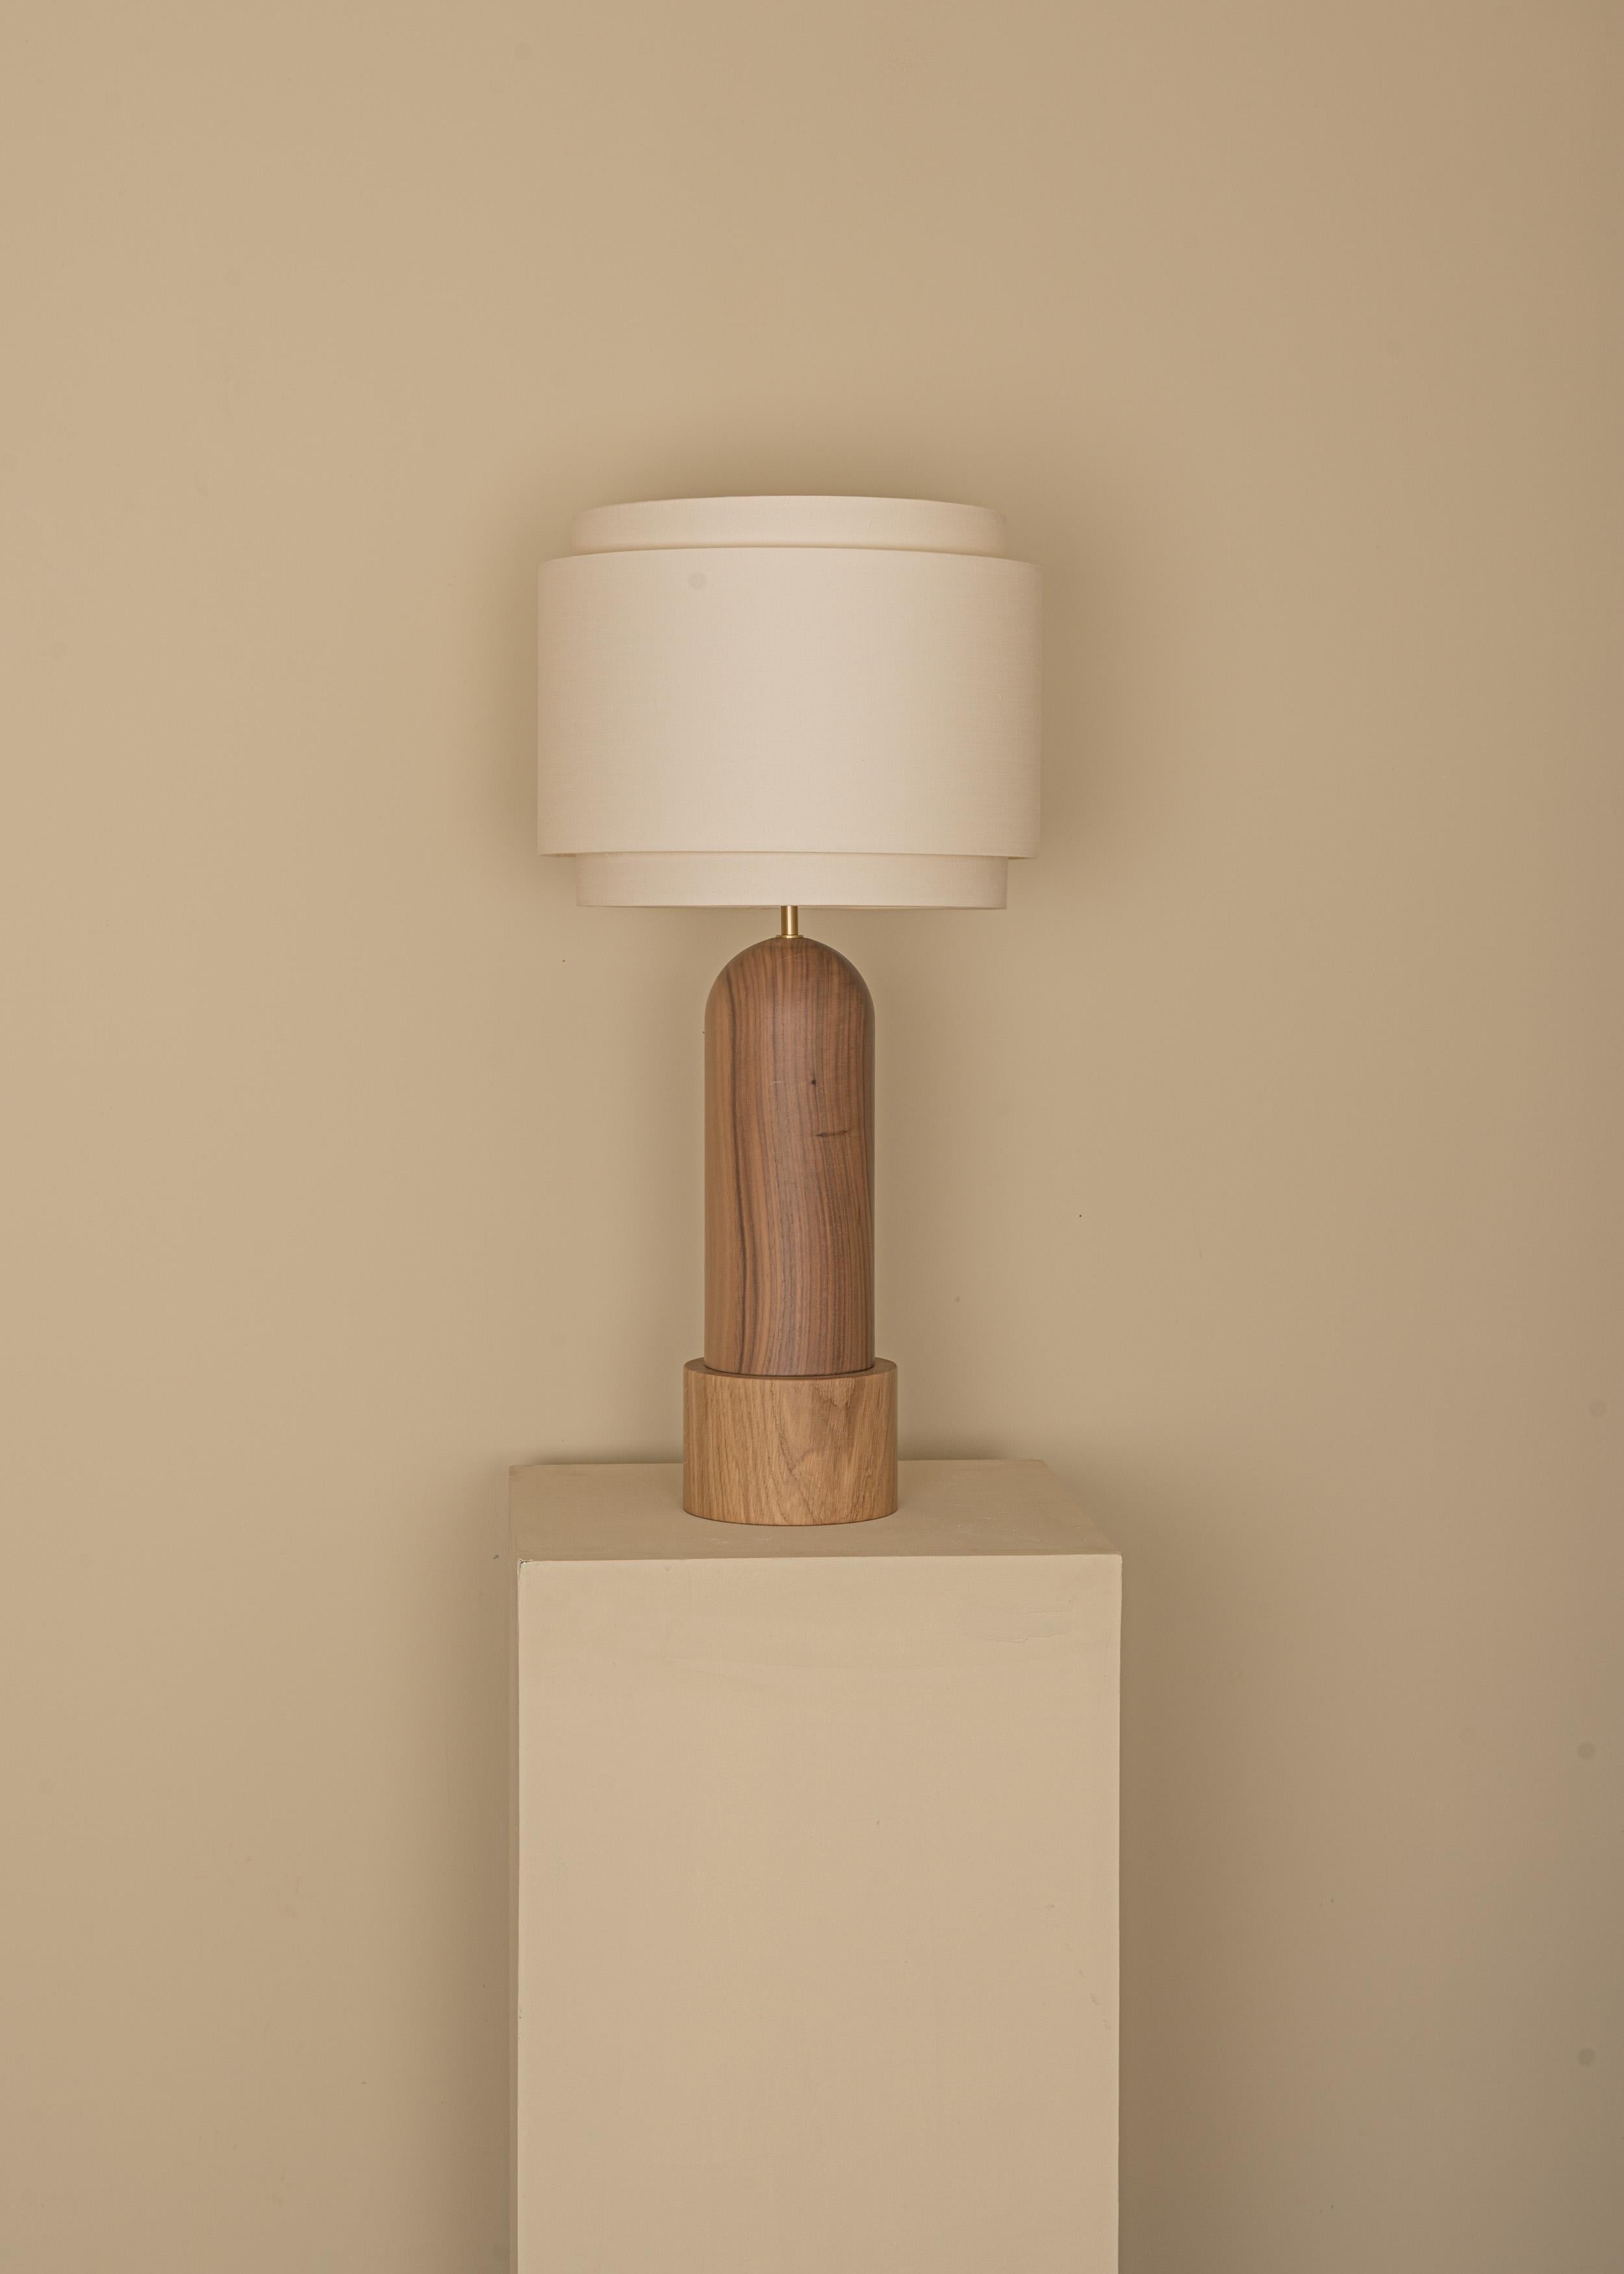 Walnut And Oak Base Pura Kelo Double Table Lamp by Simone & Marcel
Dimensions: D 35 x W 35 x H 69 cm.
Materials: Brass, cotton, oak and walnut.

Also available in different marble, wood and alabaster options and finishes. Custom options available on